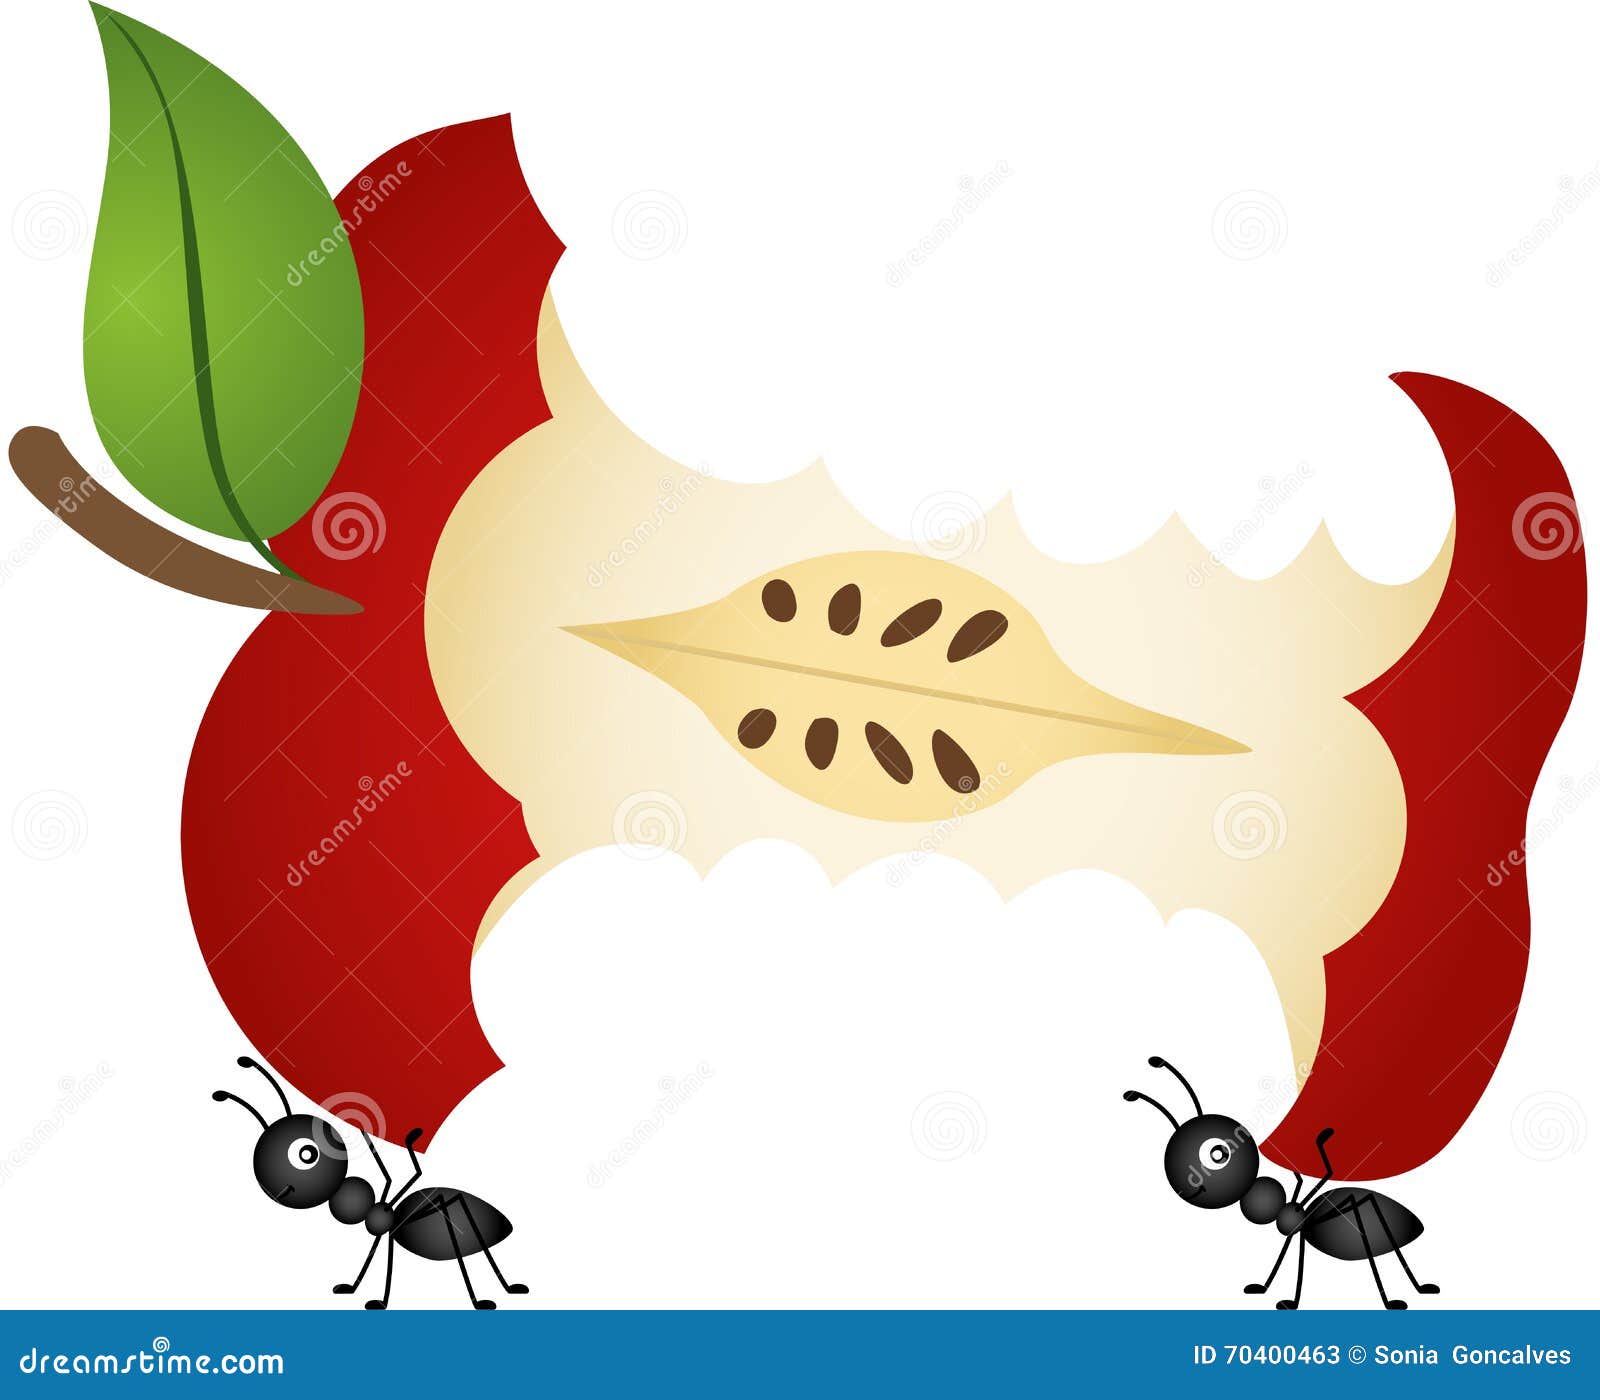 ants carrying apple core